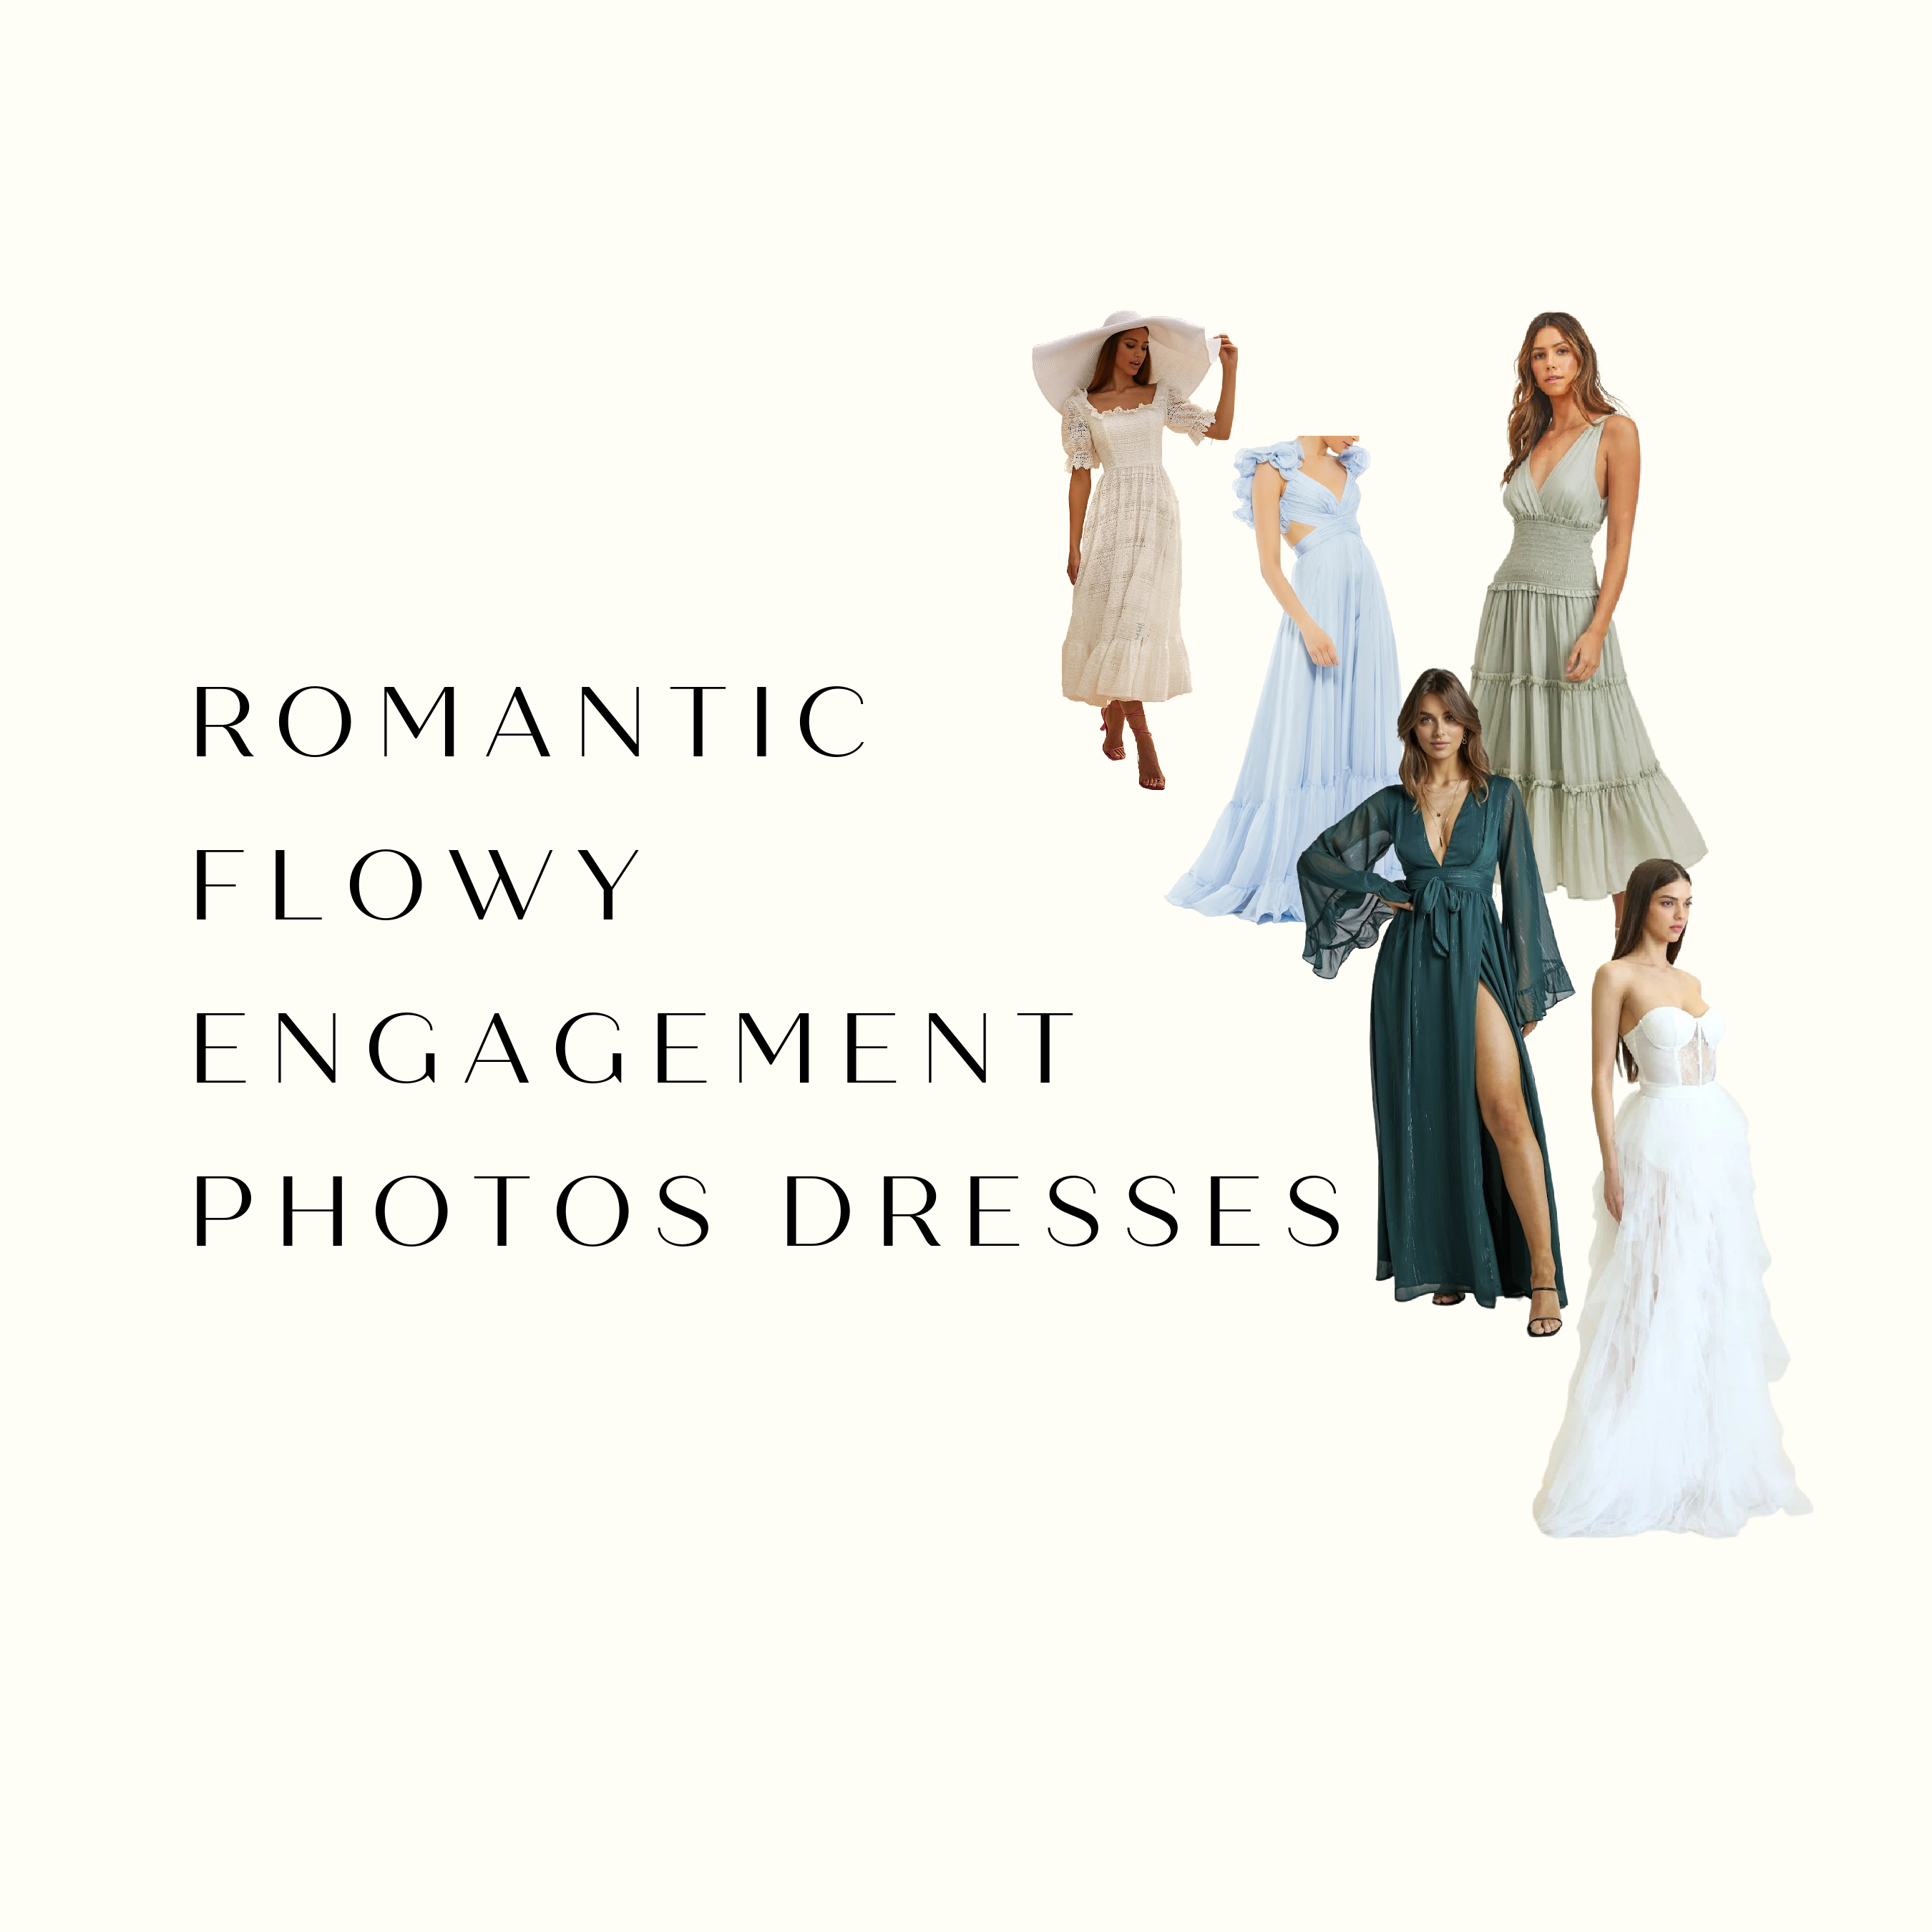 suess-moments-weddings-new-jersey-ENGAGEMENT-photos-dresses-what-to-wear-to-photos-shoot-romantic-and-flowy